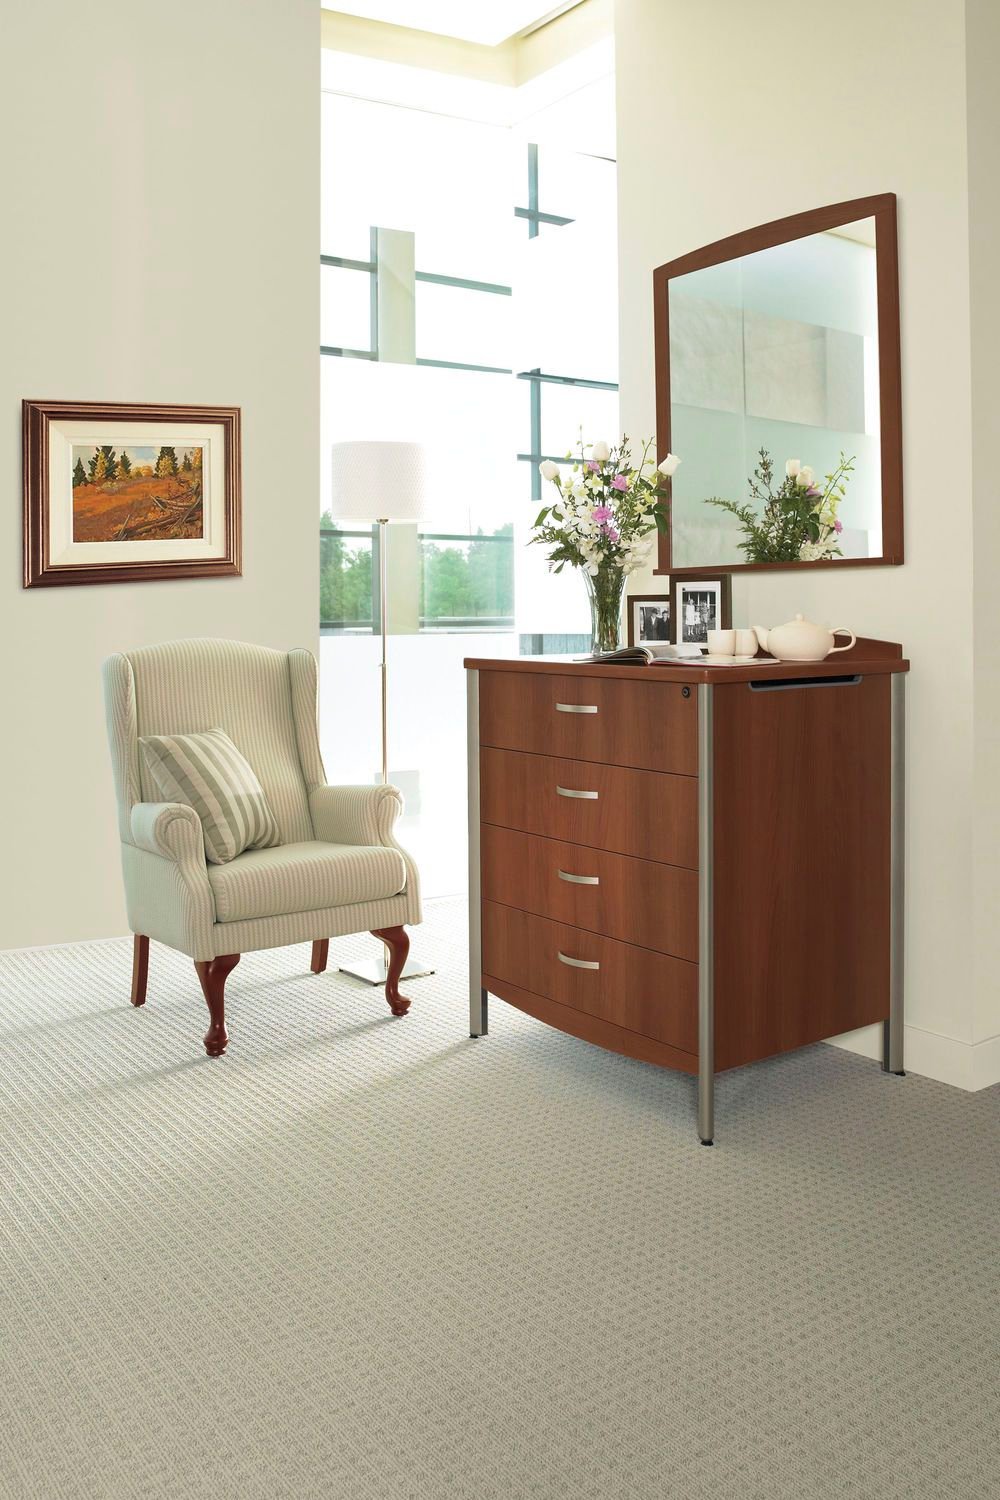 Healthcare facility chest of drawers Sonoma Global Care